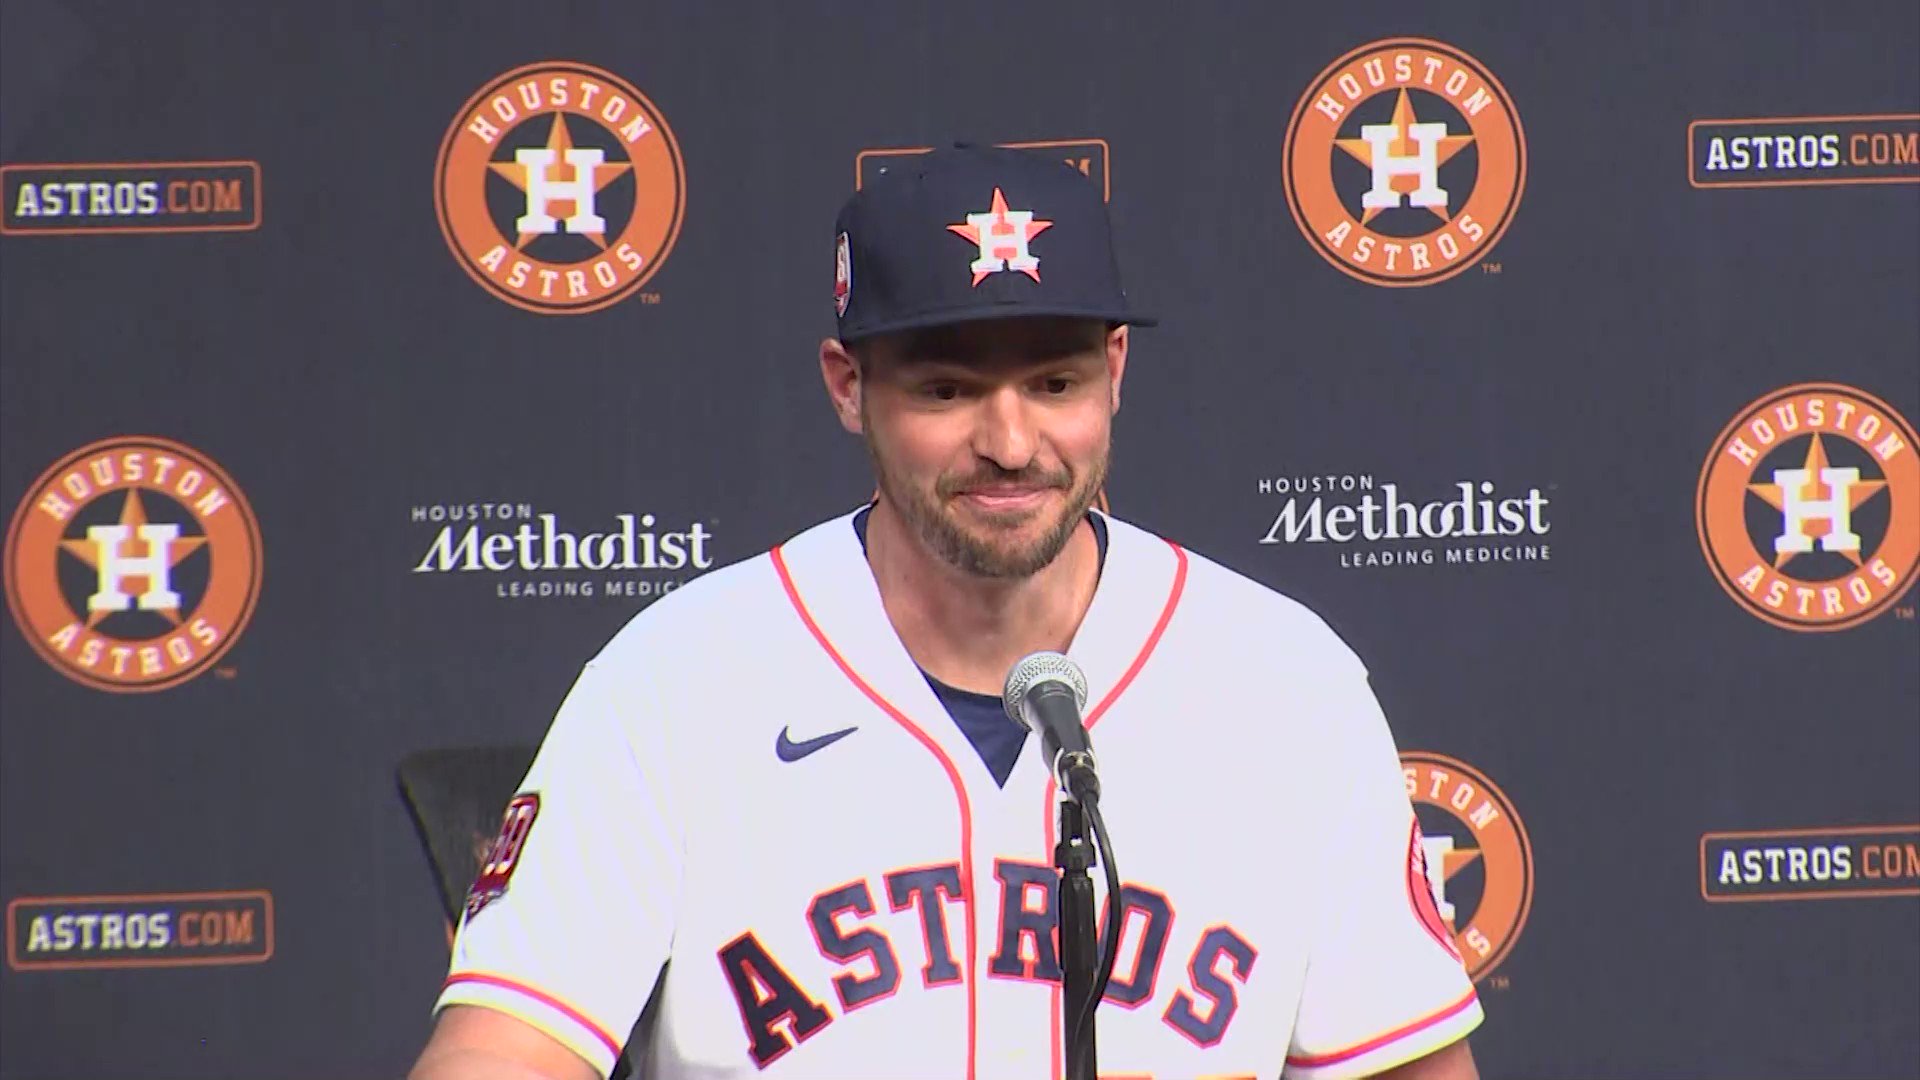 Daniel Gotera on Twitter: New #Astros 1B/OF Trey Mancini on wearing a  different jersey for the first time in his career: Still got the orange  going here so, feels goodit's a cool